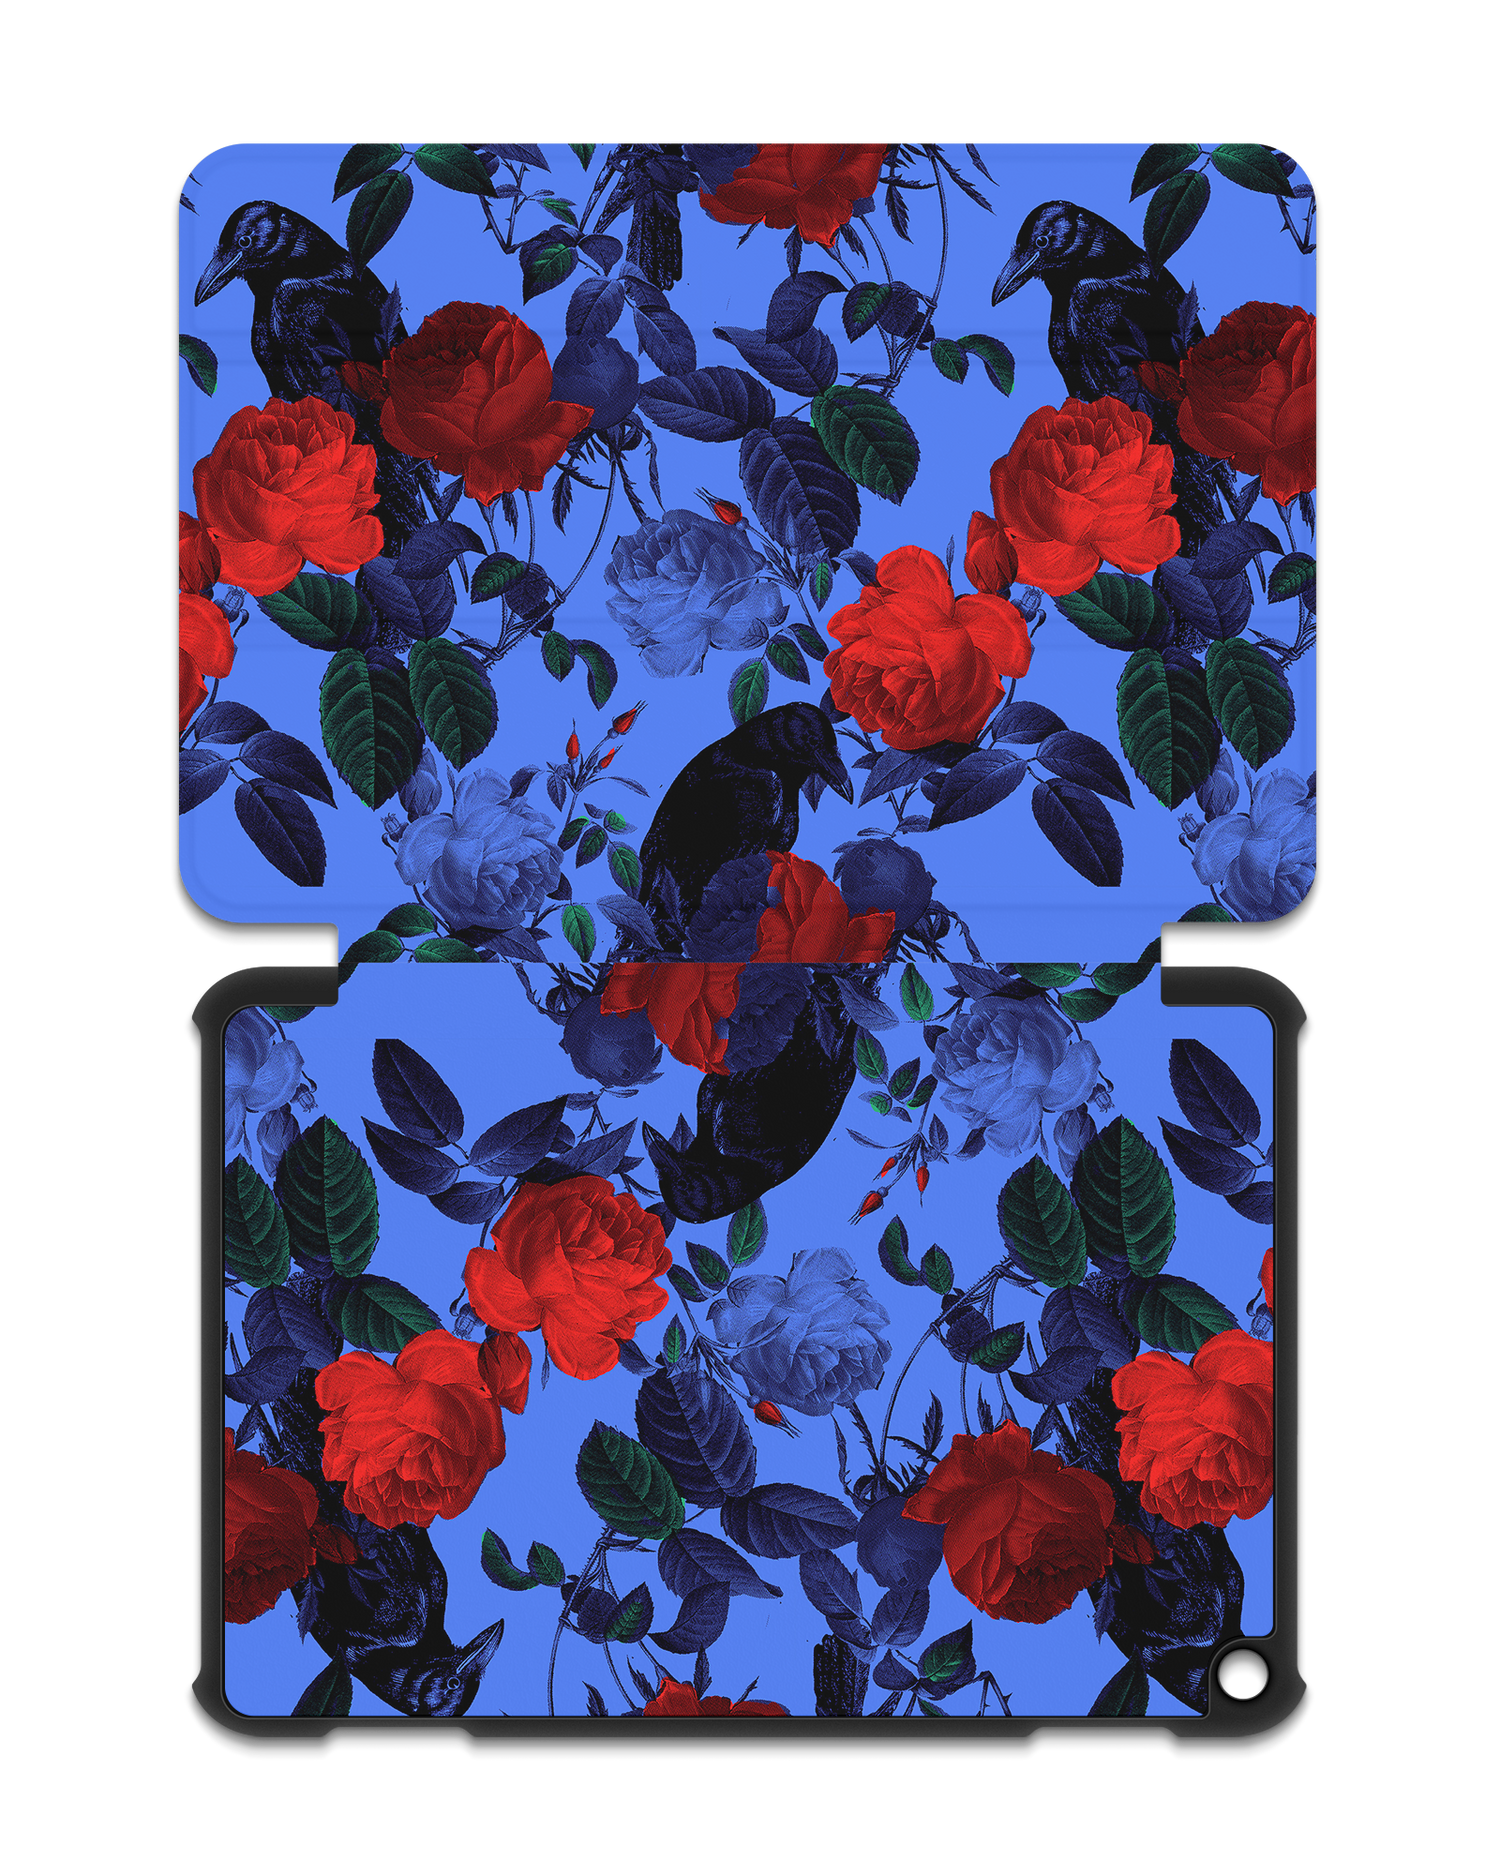 Roses And Ravens Tablet Smart Case for Amazon Fire HD 8 (2022), Amazon Fire HD 8 Plus (2022), Amazon Fire HD 8 (2020), Amazon Fire HD 8 Plus (2020): Opened